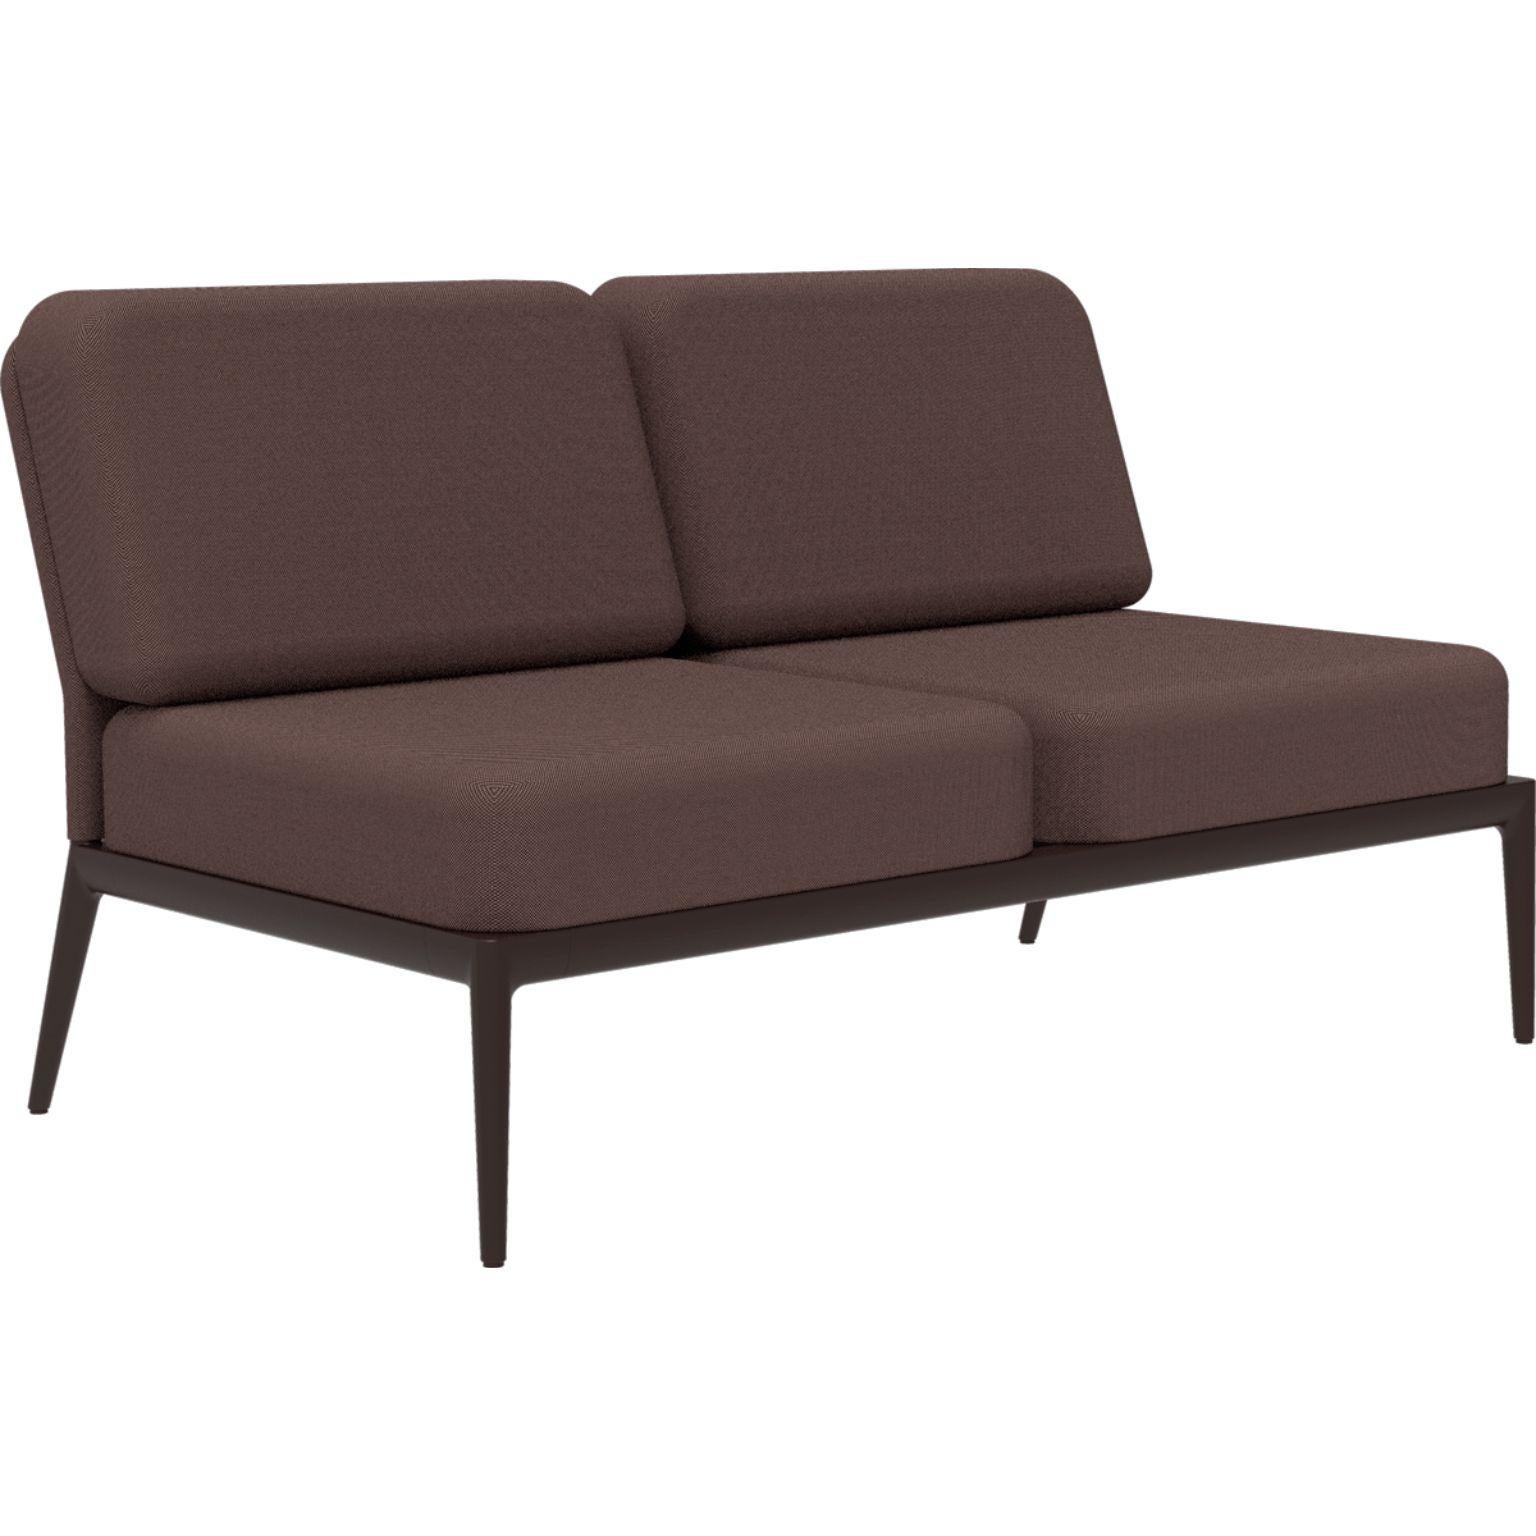 Cover Chocolate Double Central modular sofa by MOWEE
Dimensions: D83 x W136 x H81 cm (seat height 42 cm).
Material: Aluminum and upholstery.
Weight: 27 kg.
Also available in different colors and finishes.

An unmistakable collection for its